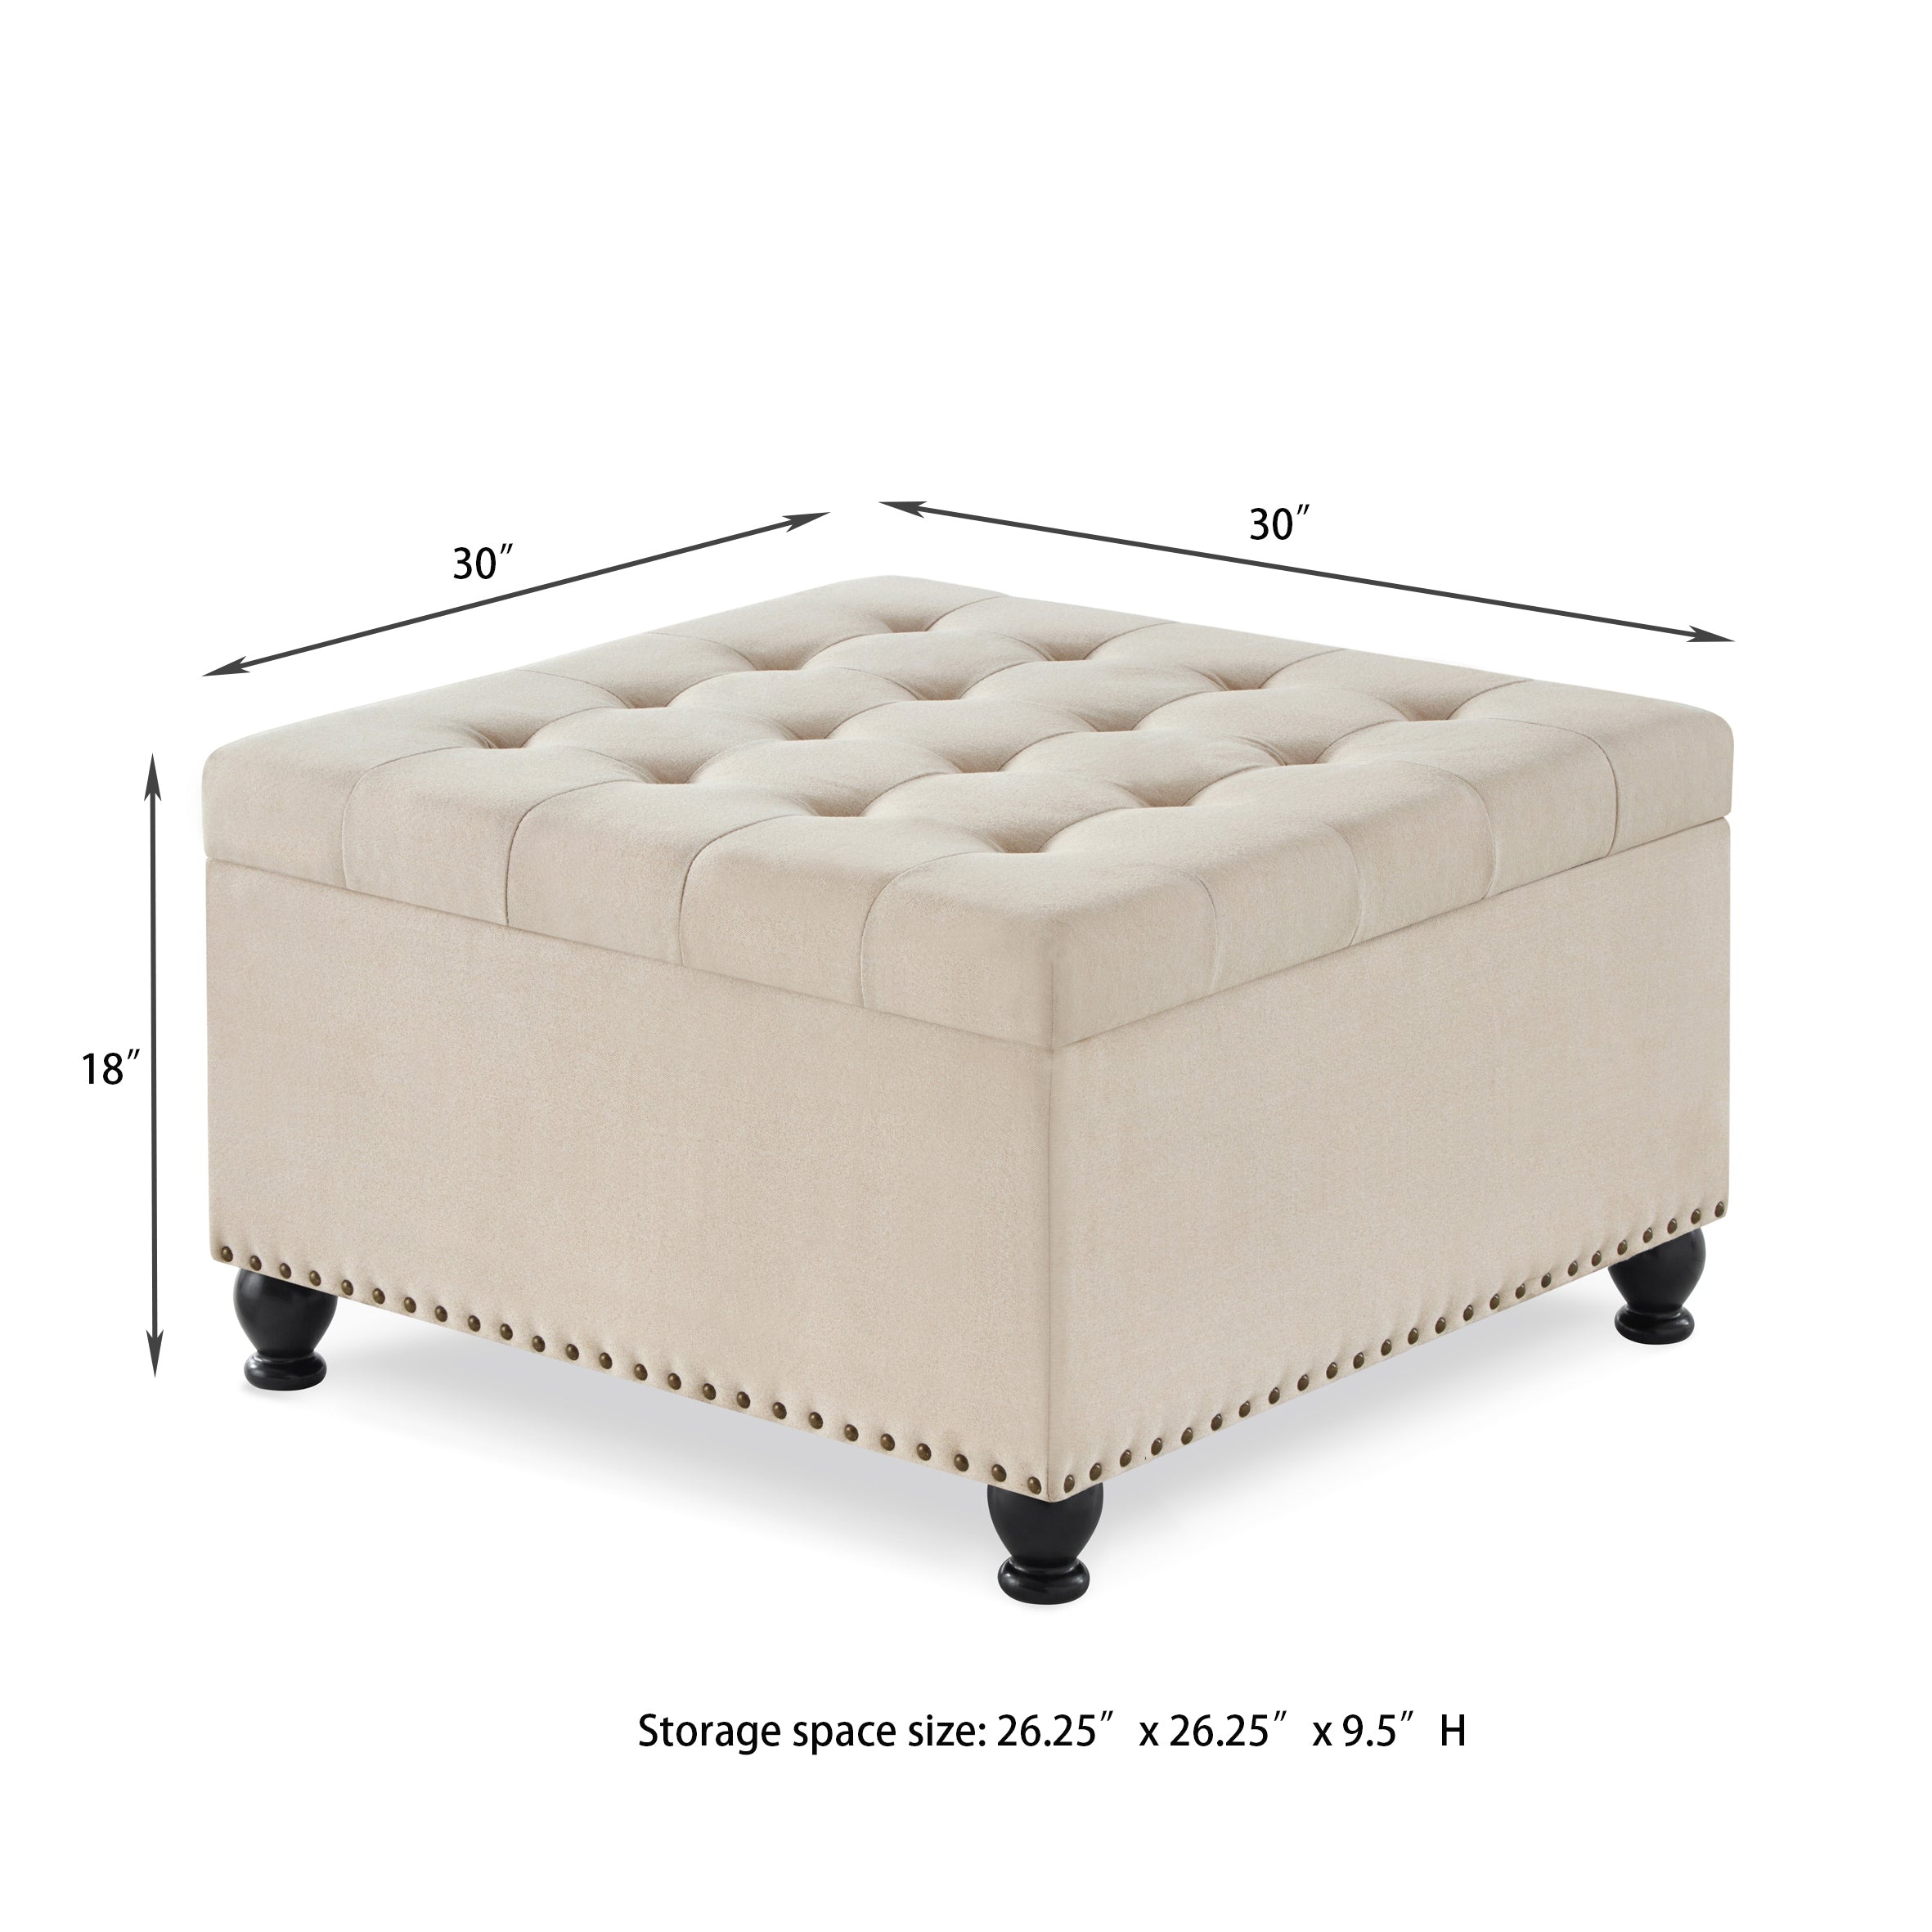 30" x 30" Large Square Storage Ottoman with Wooden Legs